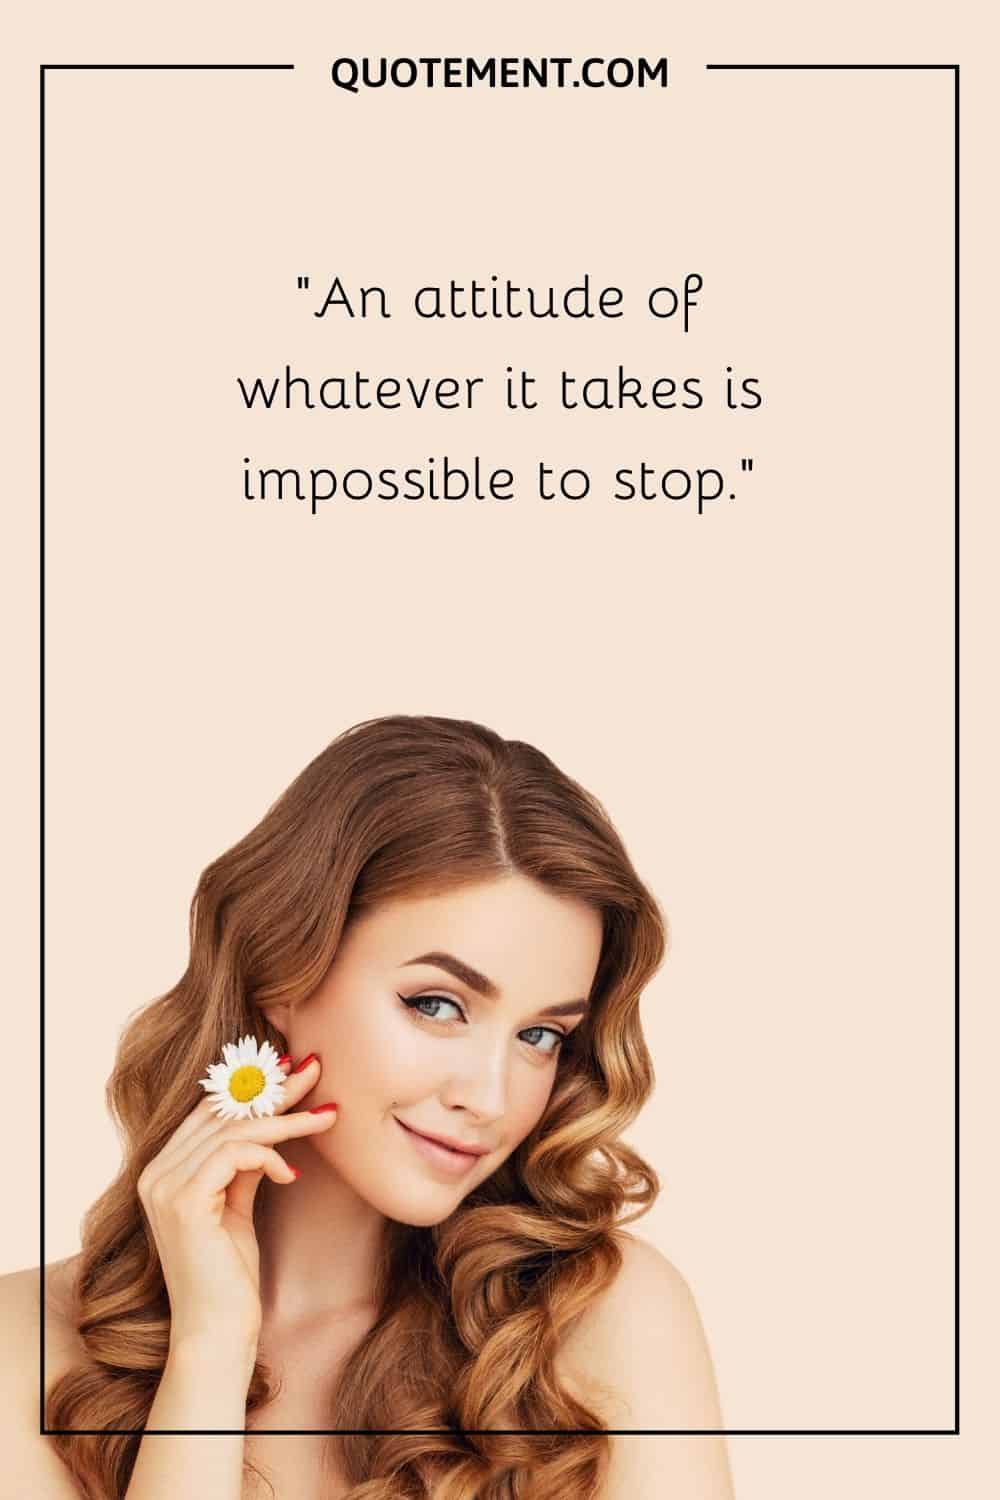 An attitude of whatever it takes is impossible to stop.